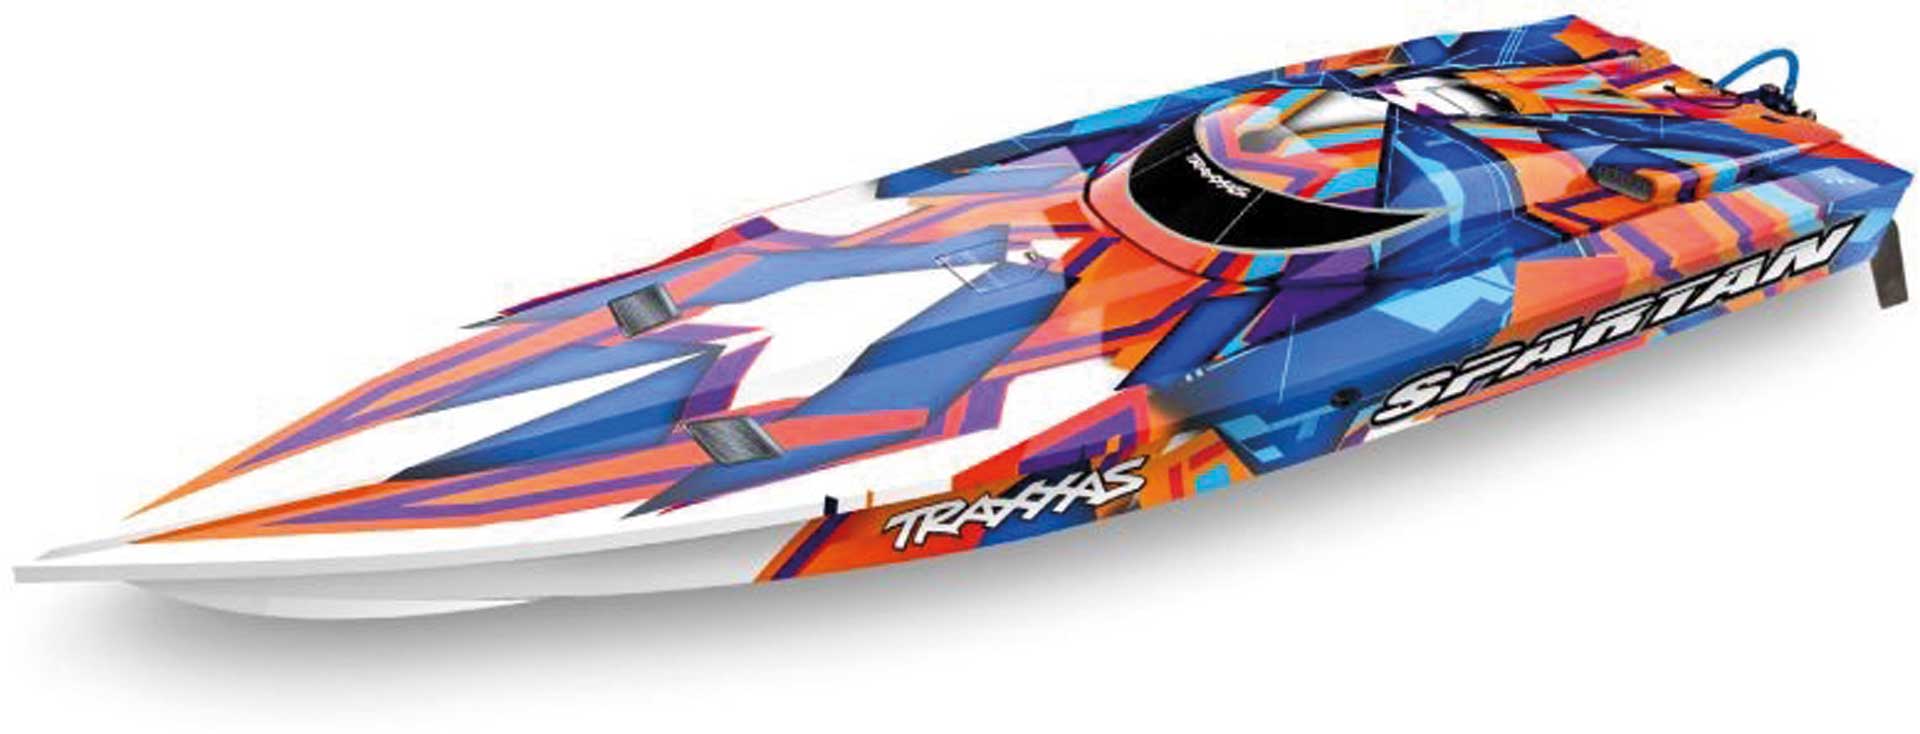 TRAXXAS SPARTAN ORANGE WITHOUT BATTERY/CHARGER BL-RACING-BOAT BRUSHLESS